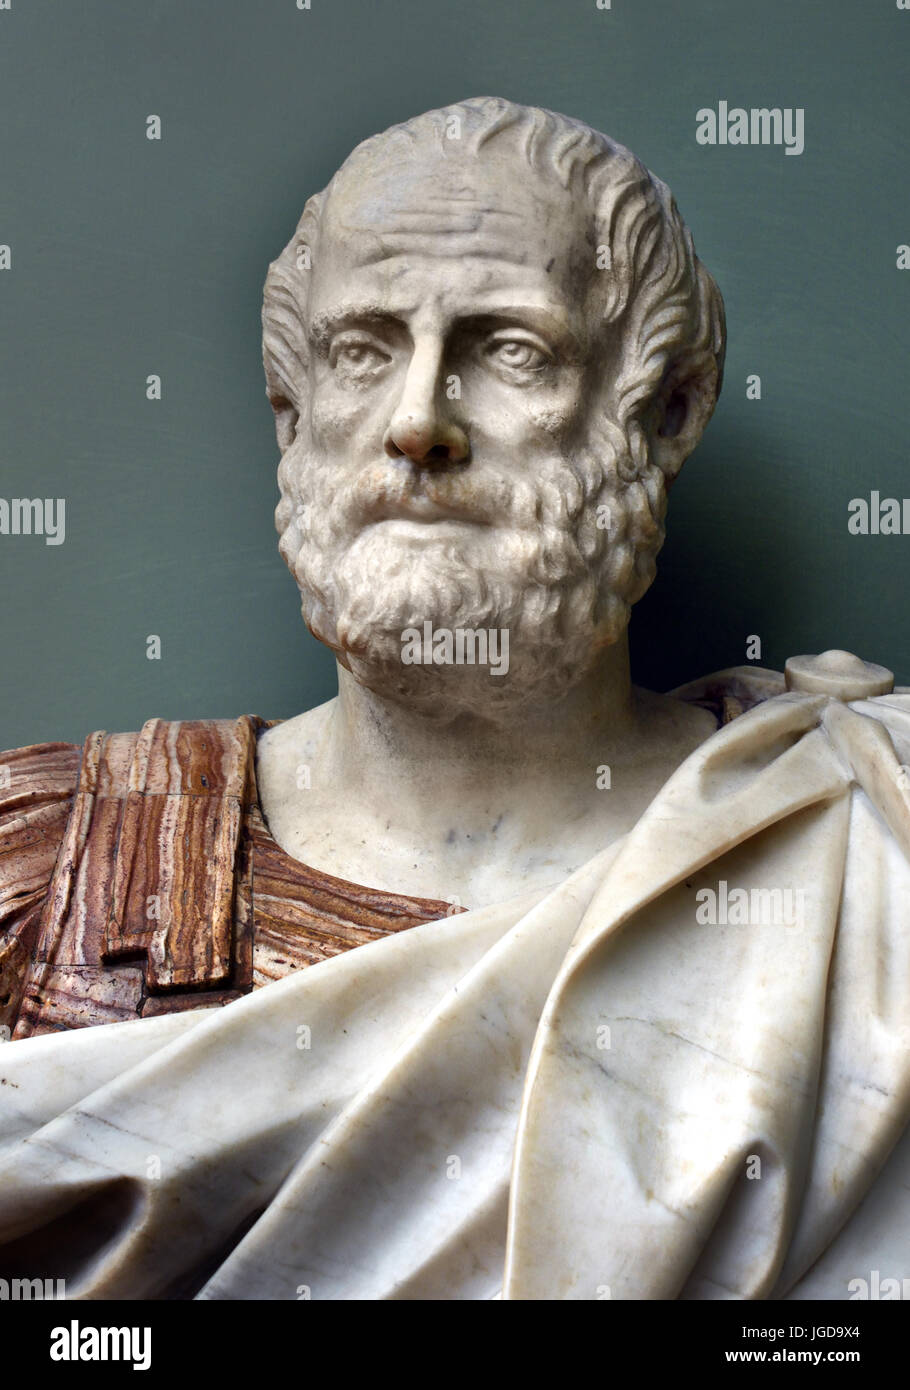 Aristotle 384–322 BC)Greek philosopher and scientist born in the city of Stagira, Chalkidiki, in the north of Classical Greece. Along with Plato, Aristotle is considered the 'Father of Western Philosophy, Stock Photo